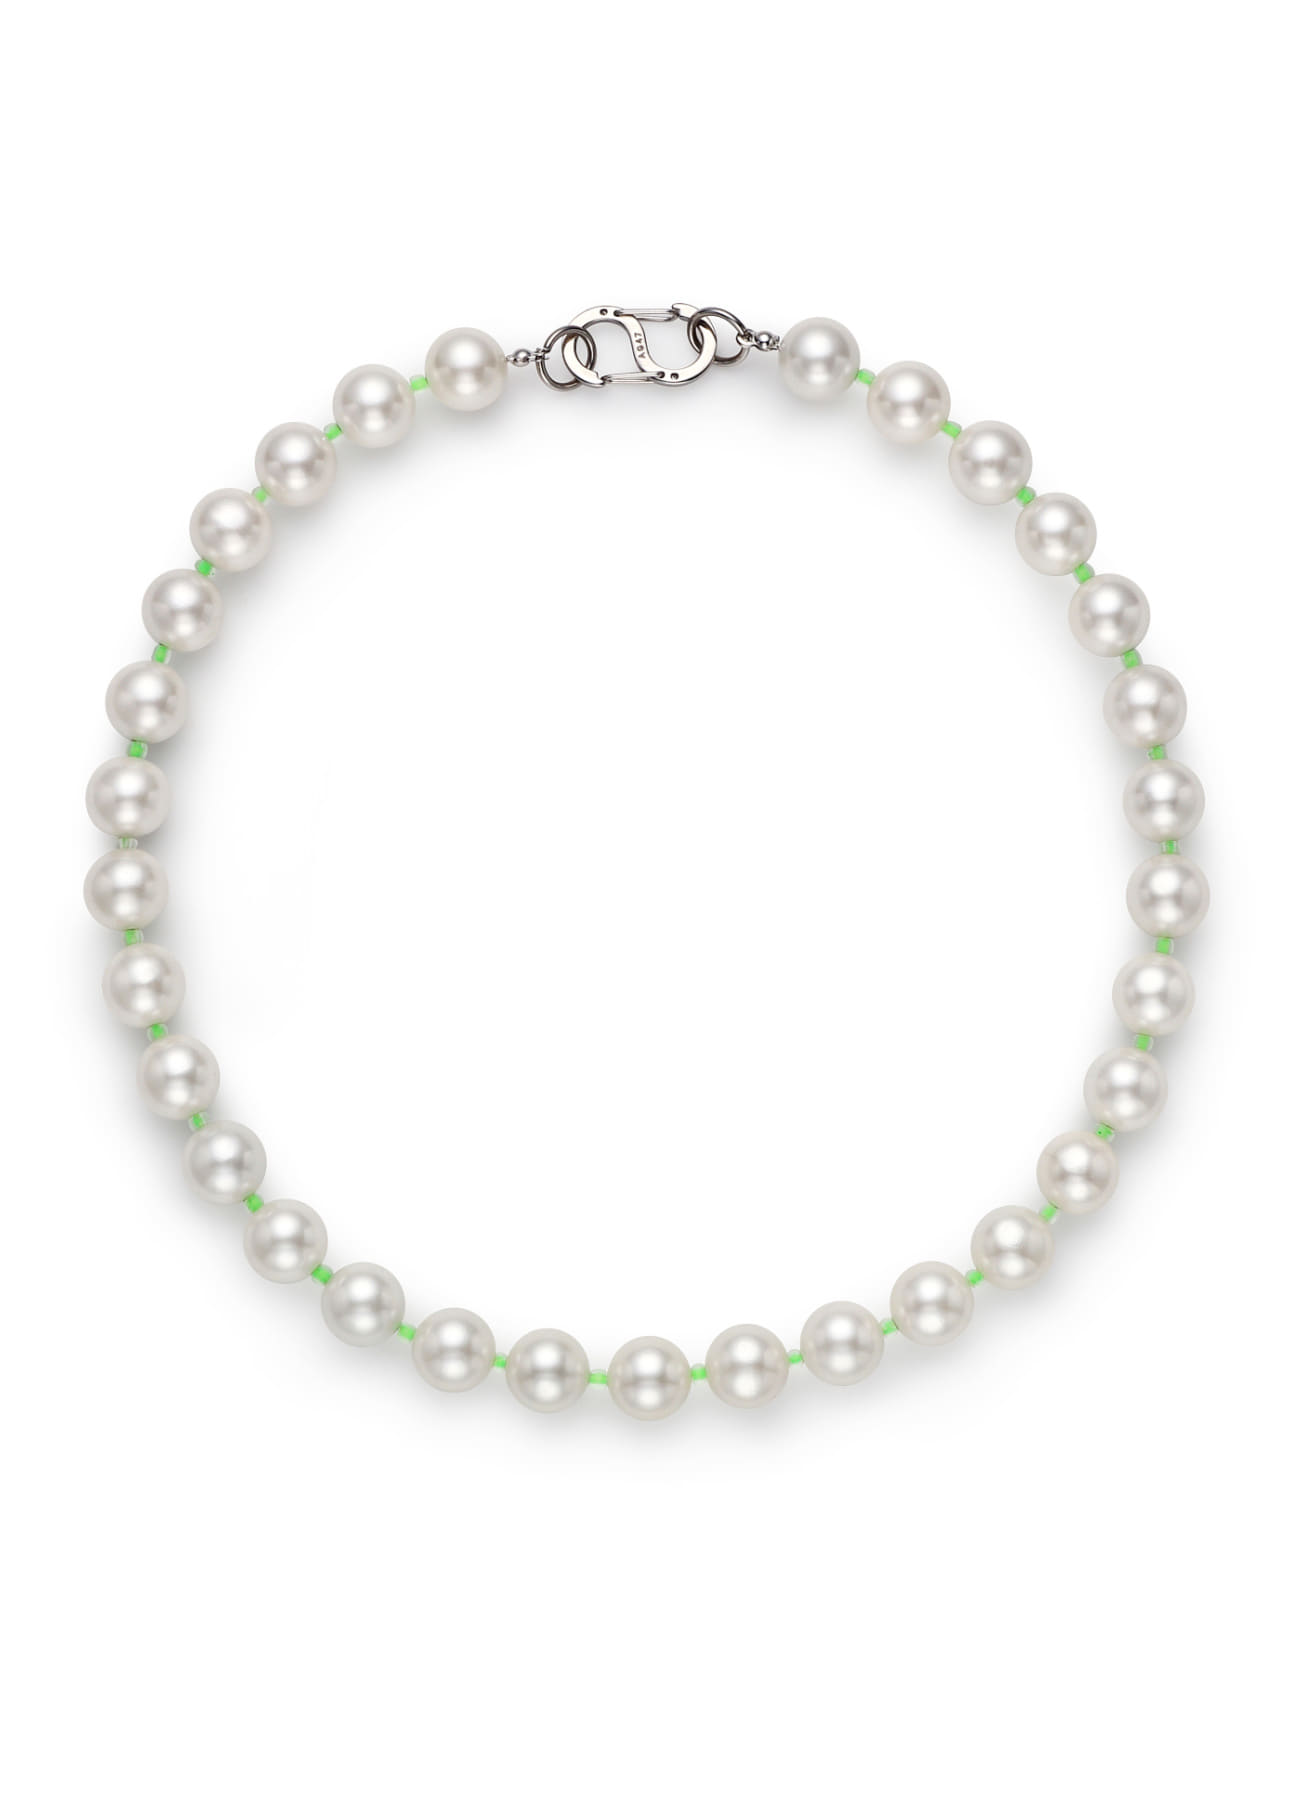 B.W.P Necklace-06 Pearl 12mm Green Beads